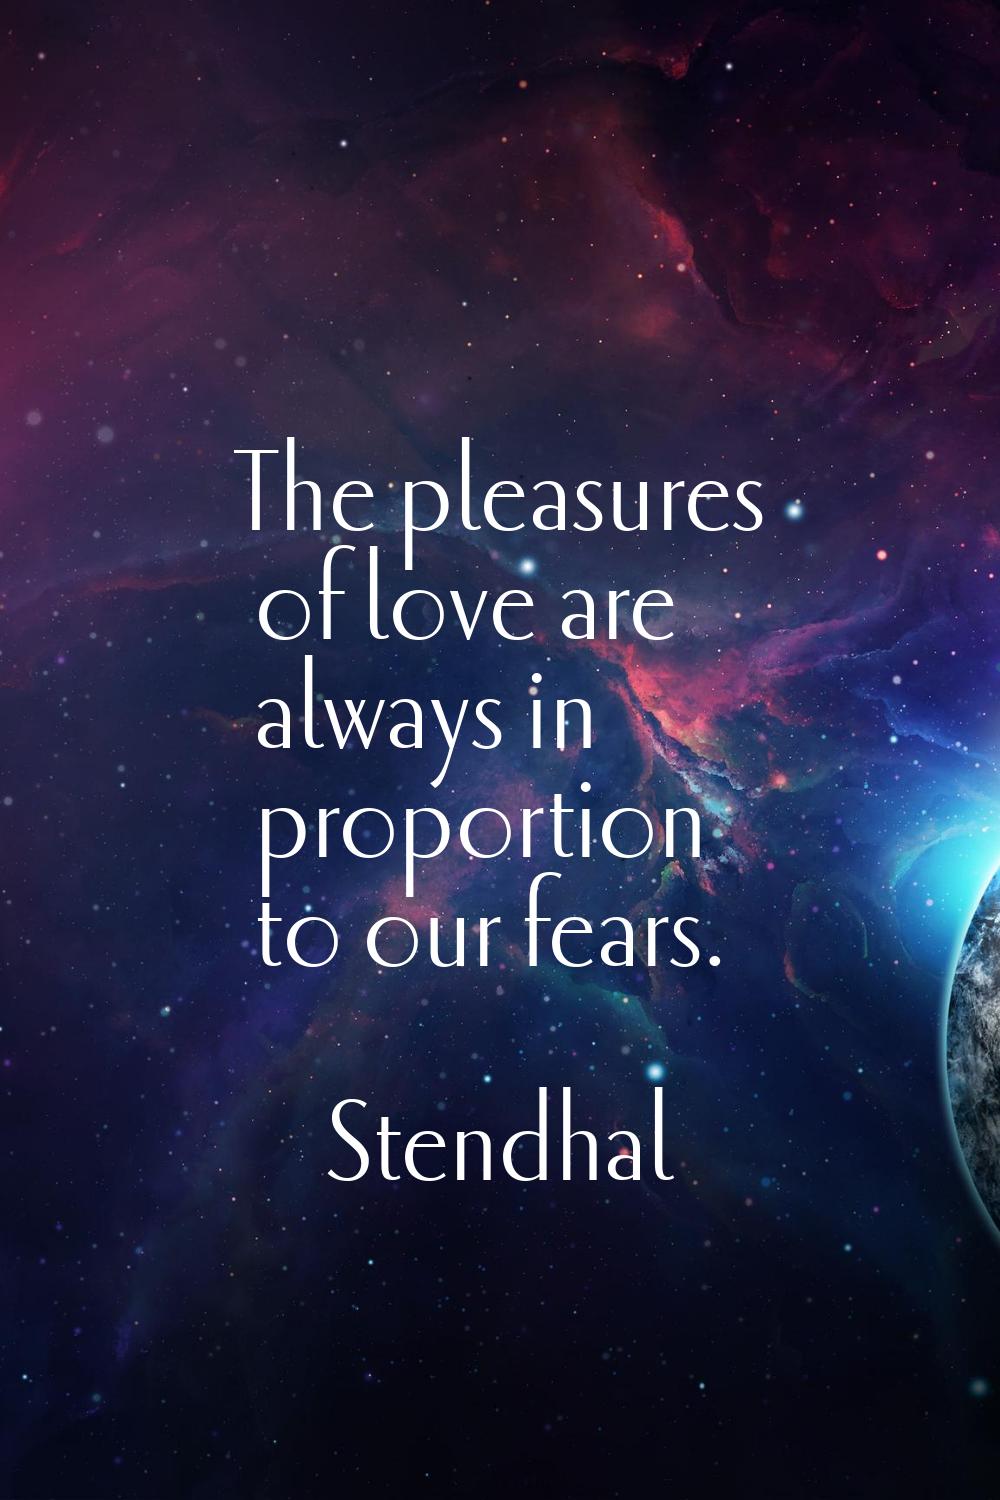 The pleasures of love are always in proportion to our fears.